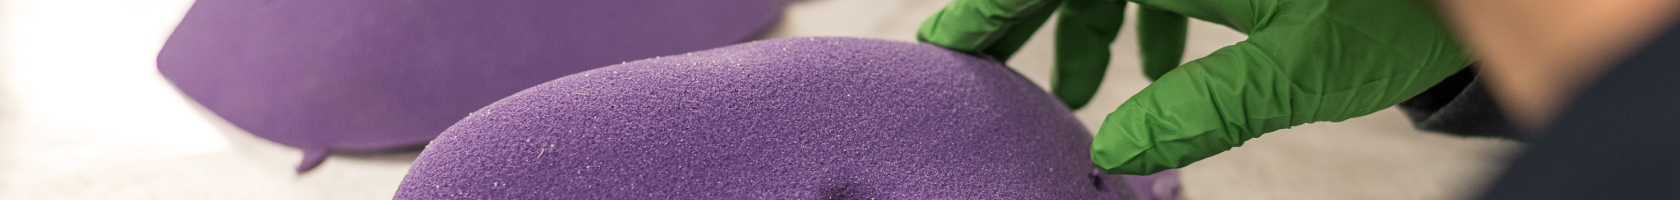 A Vertical Solutions employee inspects a tray of purple climbing holds